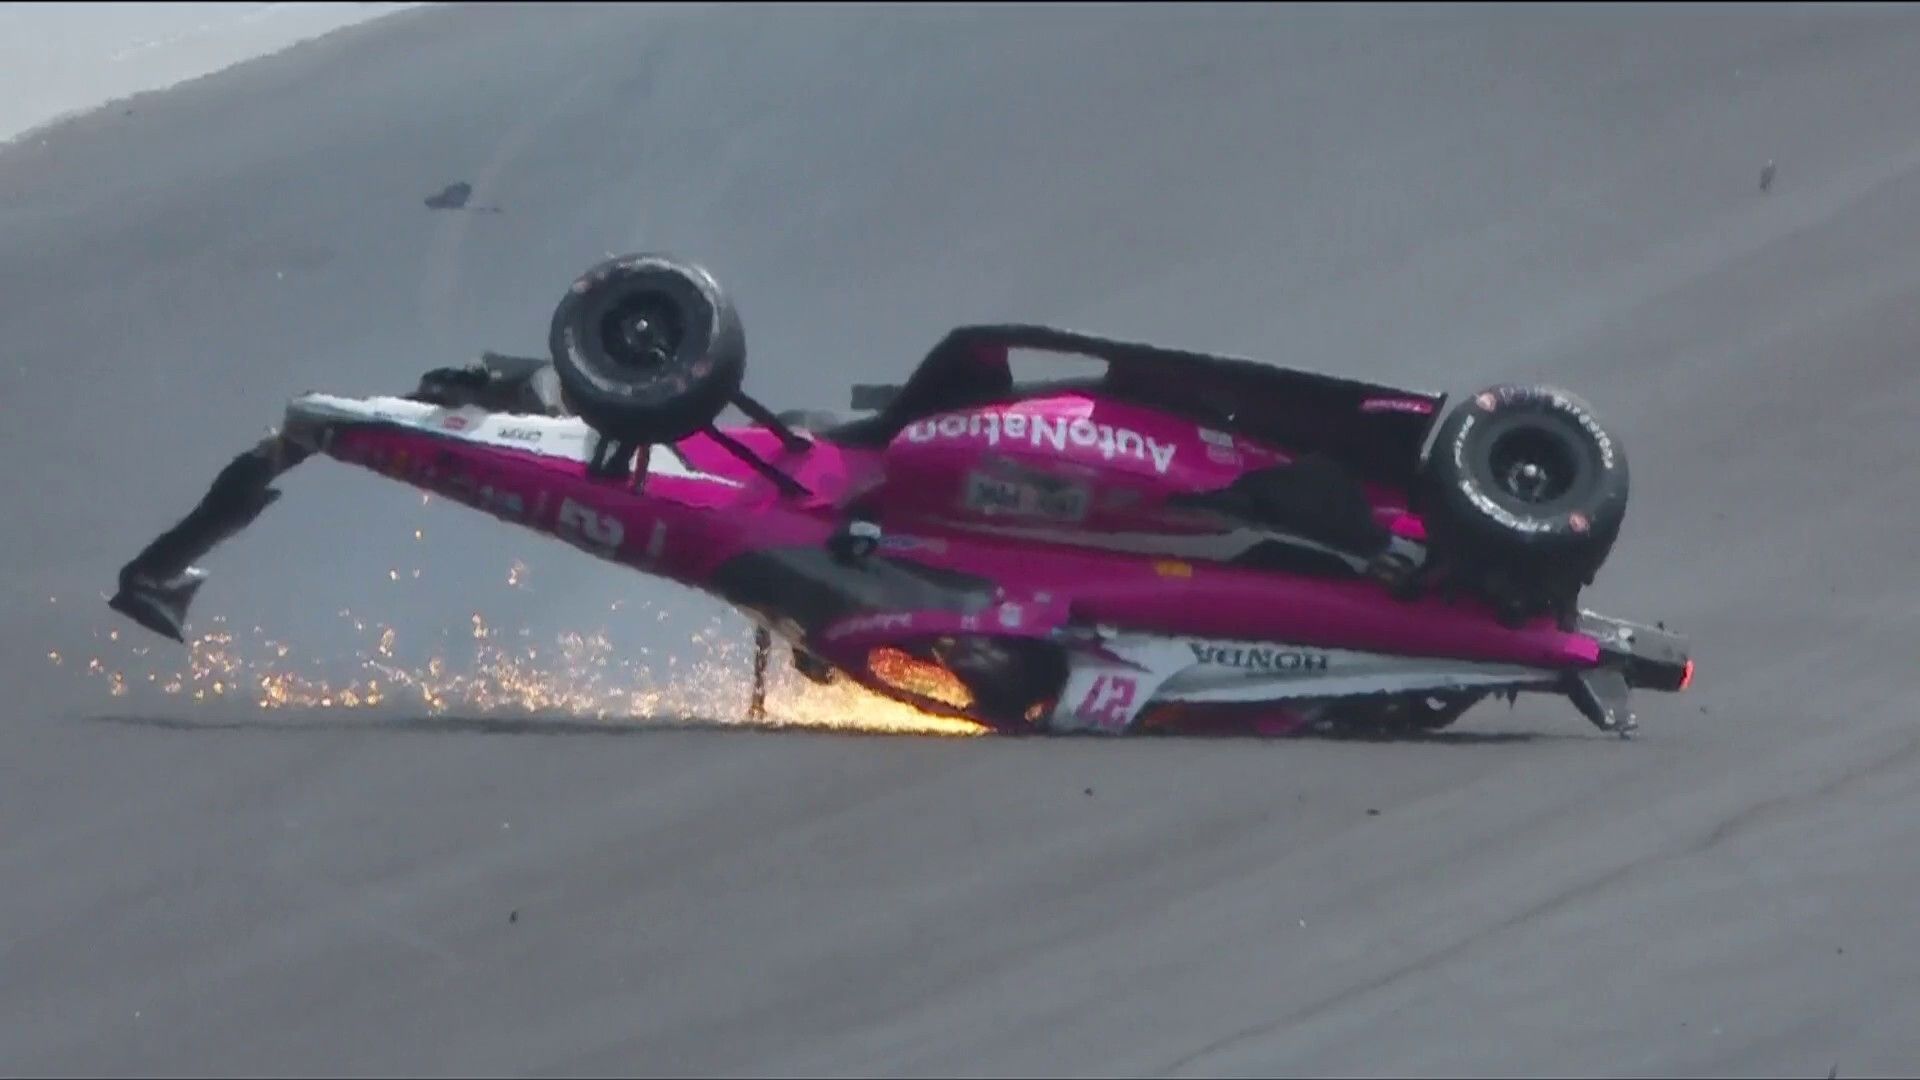 Massive Indy 500 crash sees car flip and tyre fly over grandstand